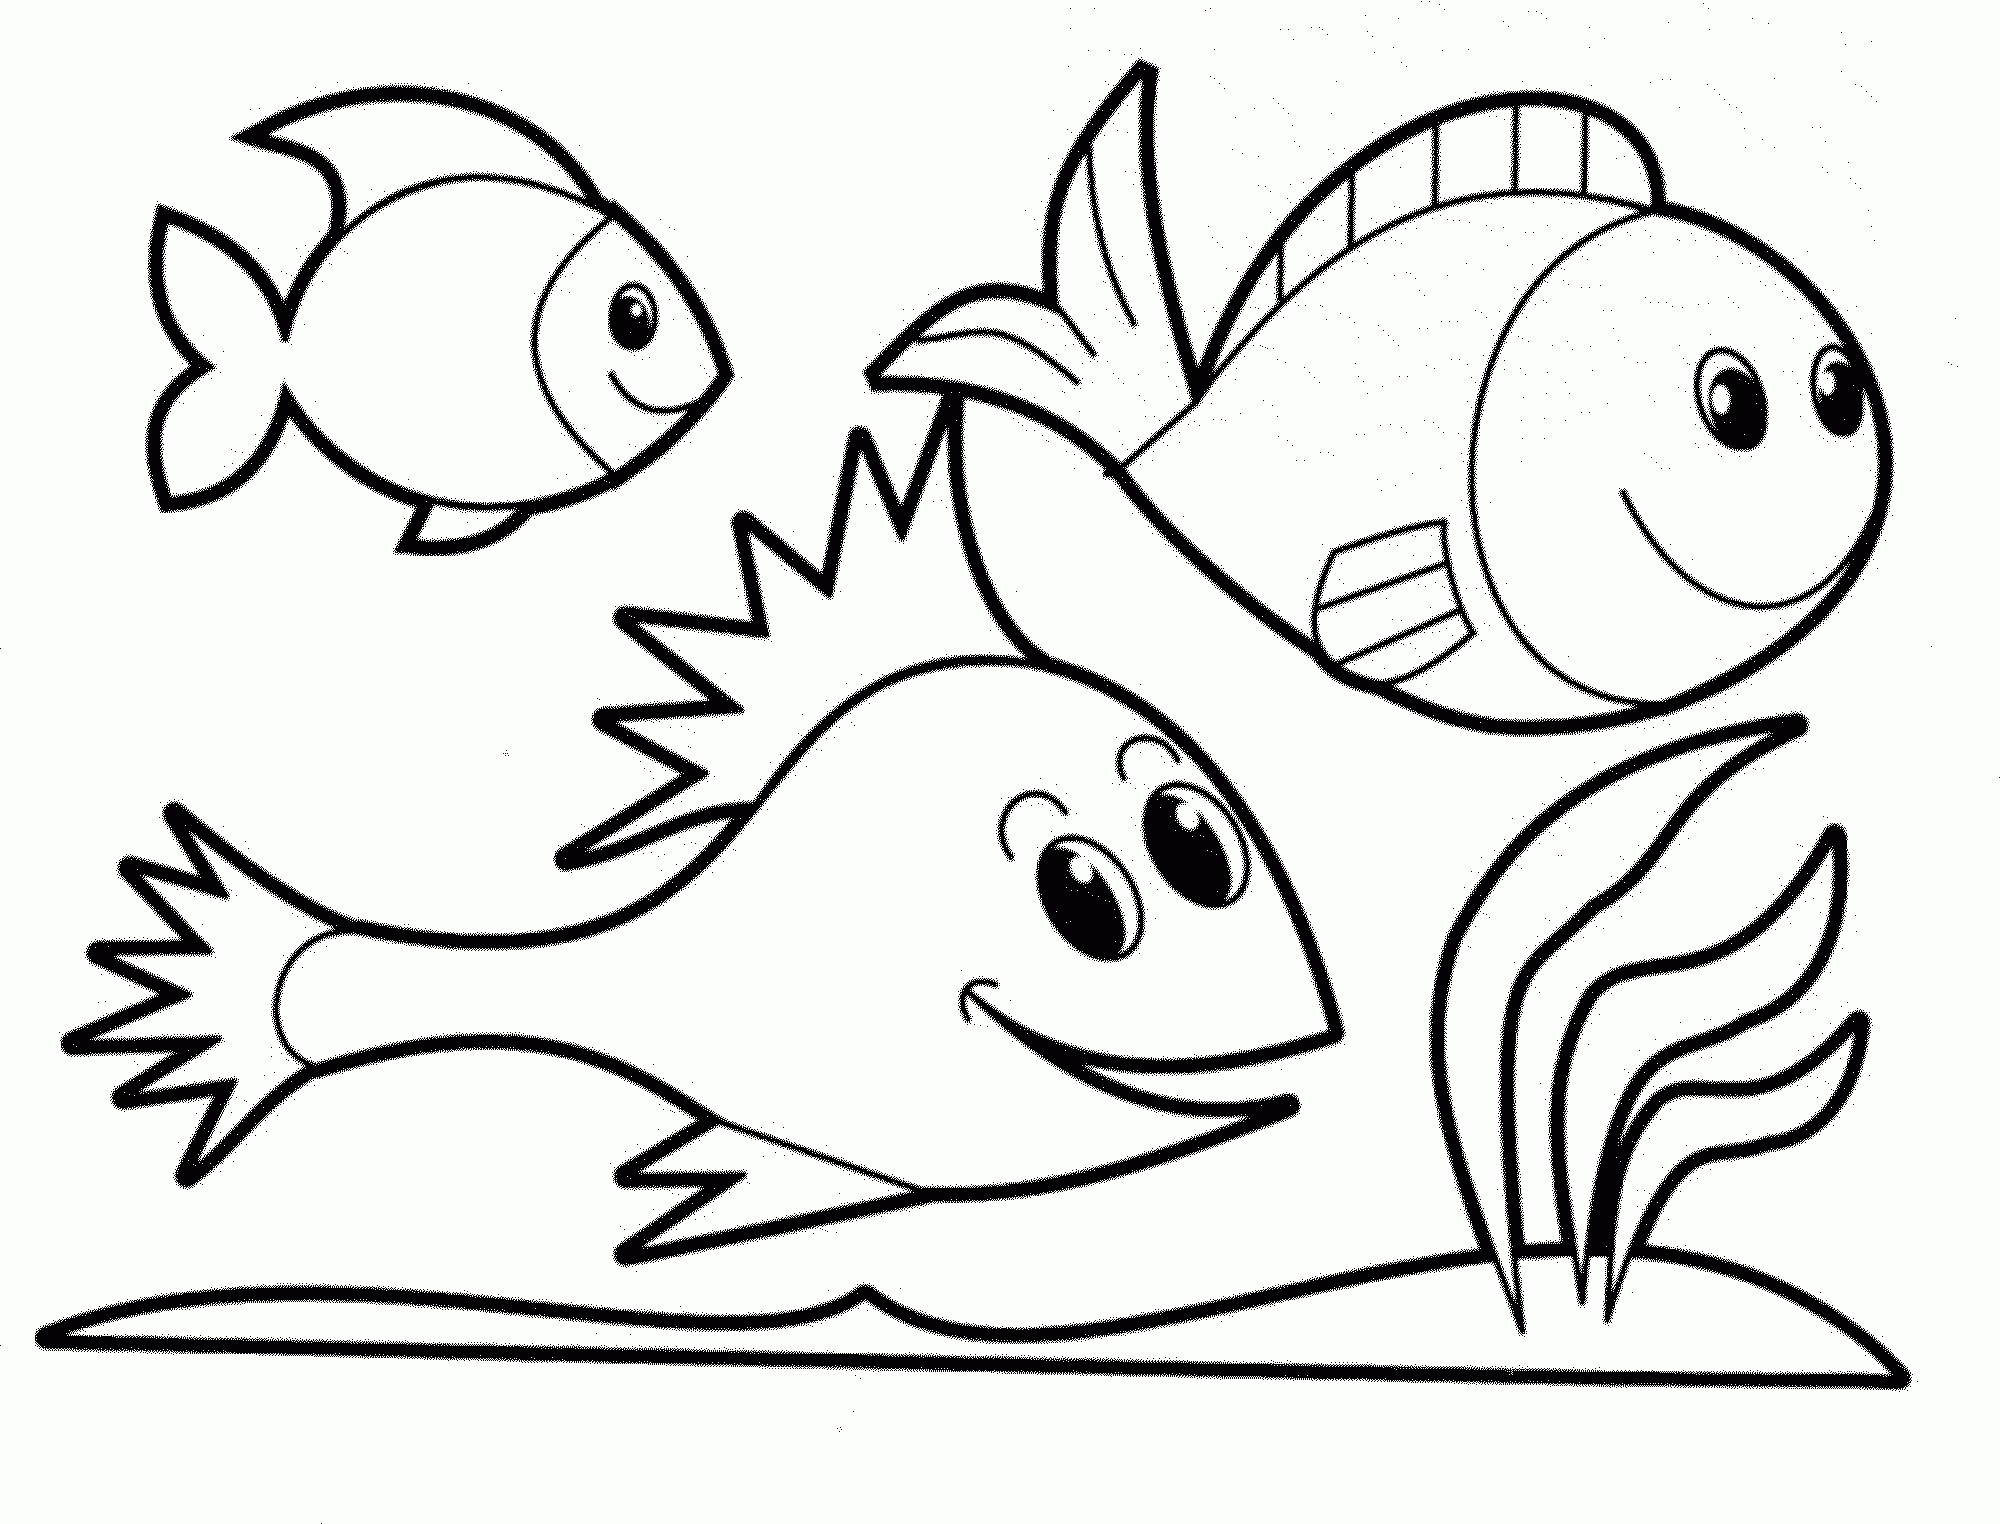 Swimming Coloring Pages To Print - Coloring Home